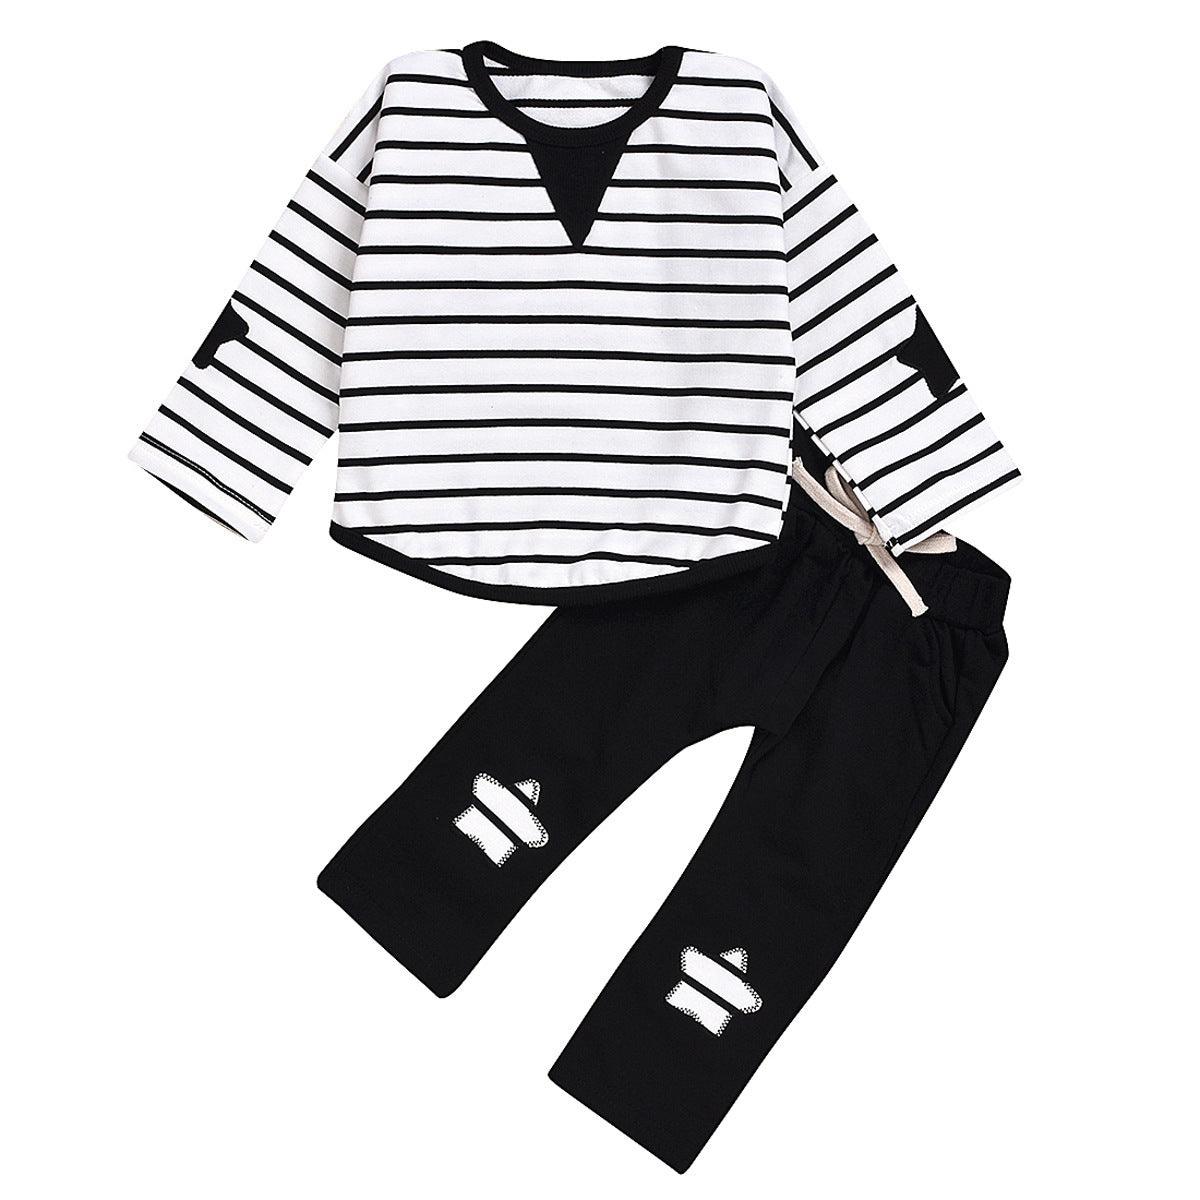 Children's Striped Suit Five-star Embroidery Trend Baby Cotton Suit